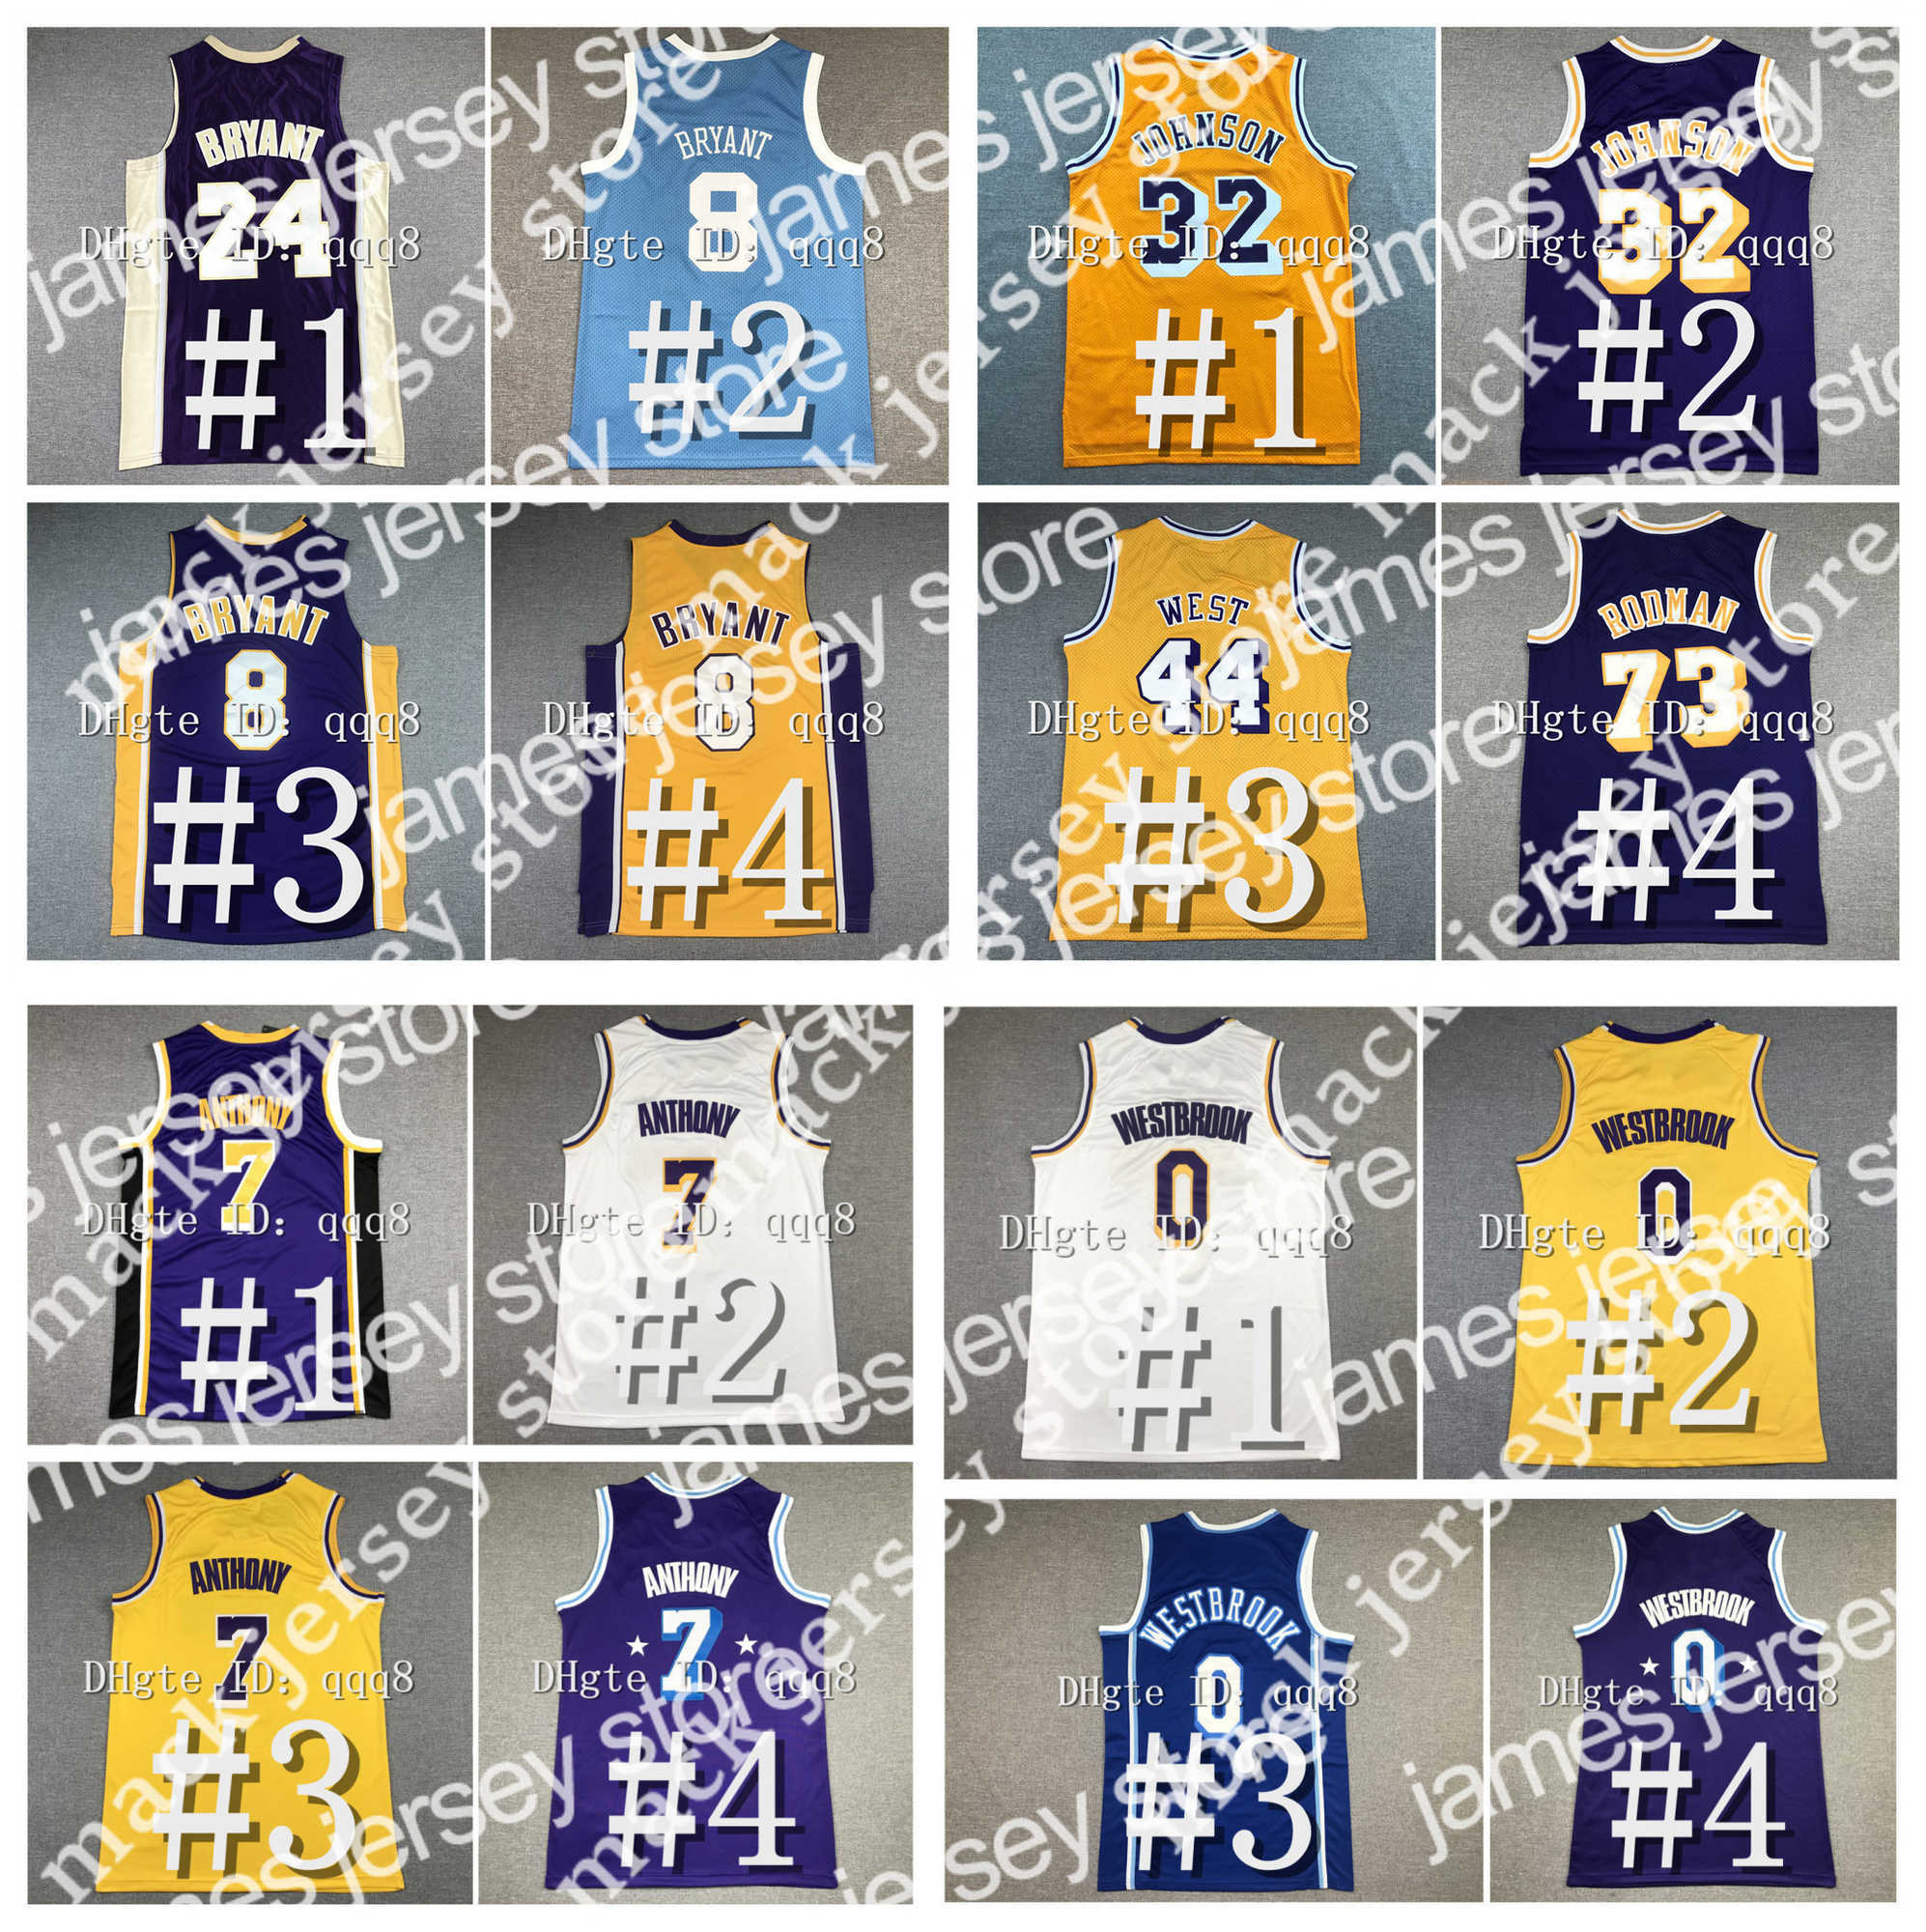 

College Basketball Wears 6 James Basketball Jersey Russell 0 Westbrook Carmelo 7 Anthony 8/24 Bryant Anthony 3 Davis Wilt 13 Chamberlain 32 Magic Johnson Jerry West, As pic